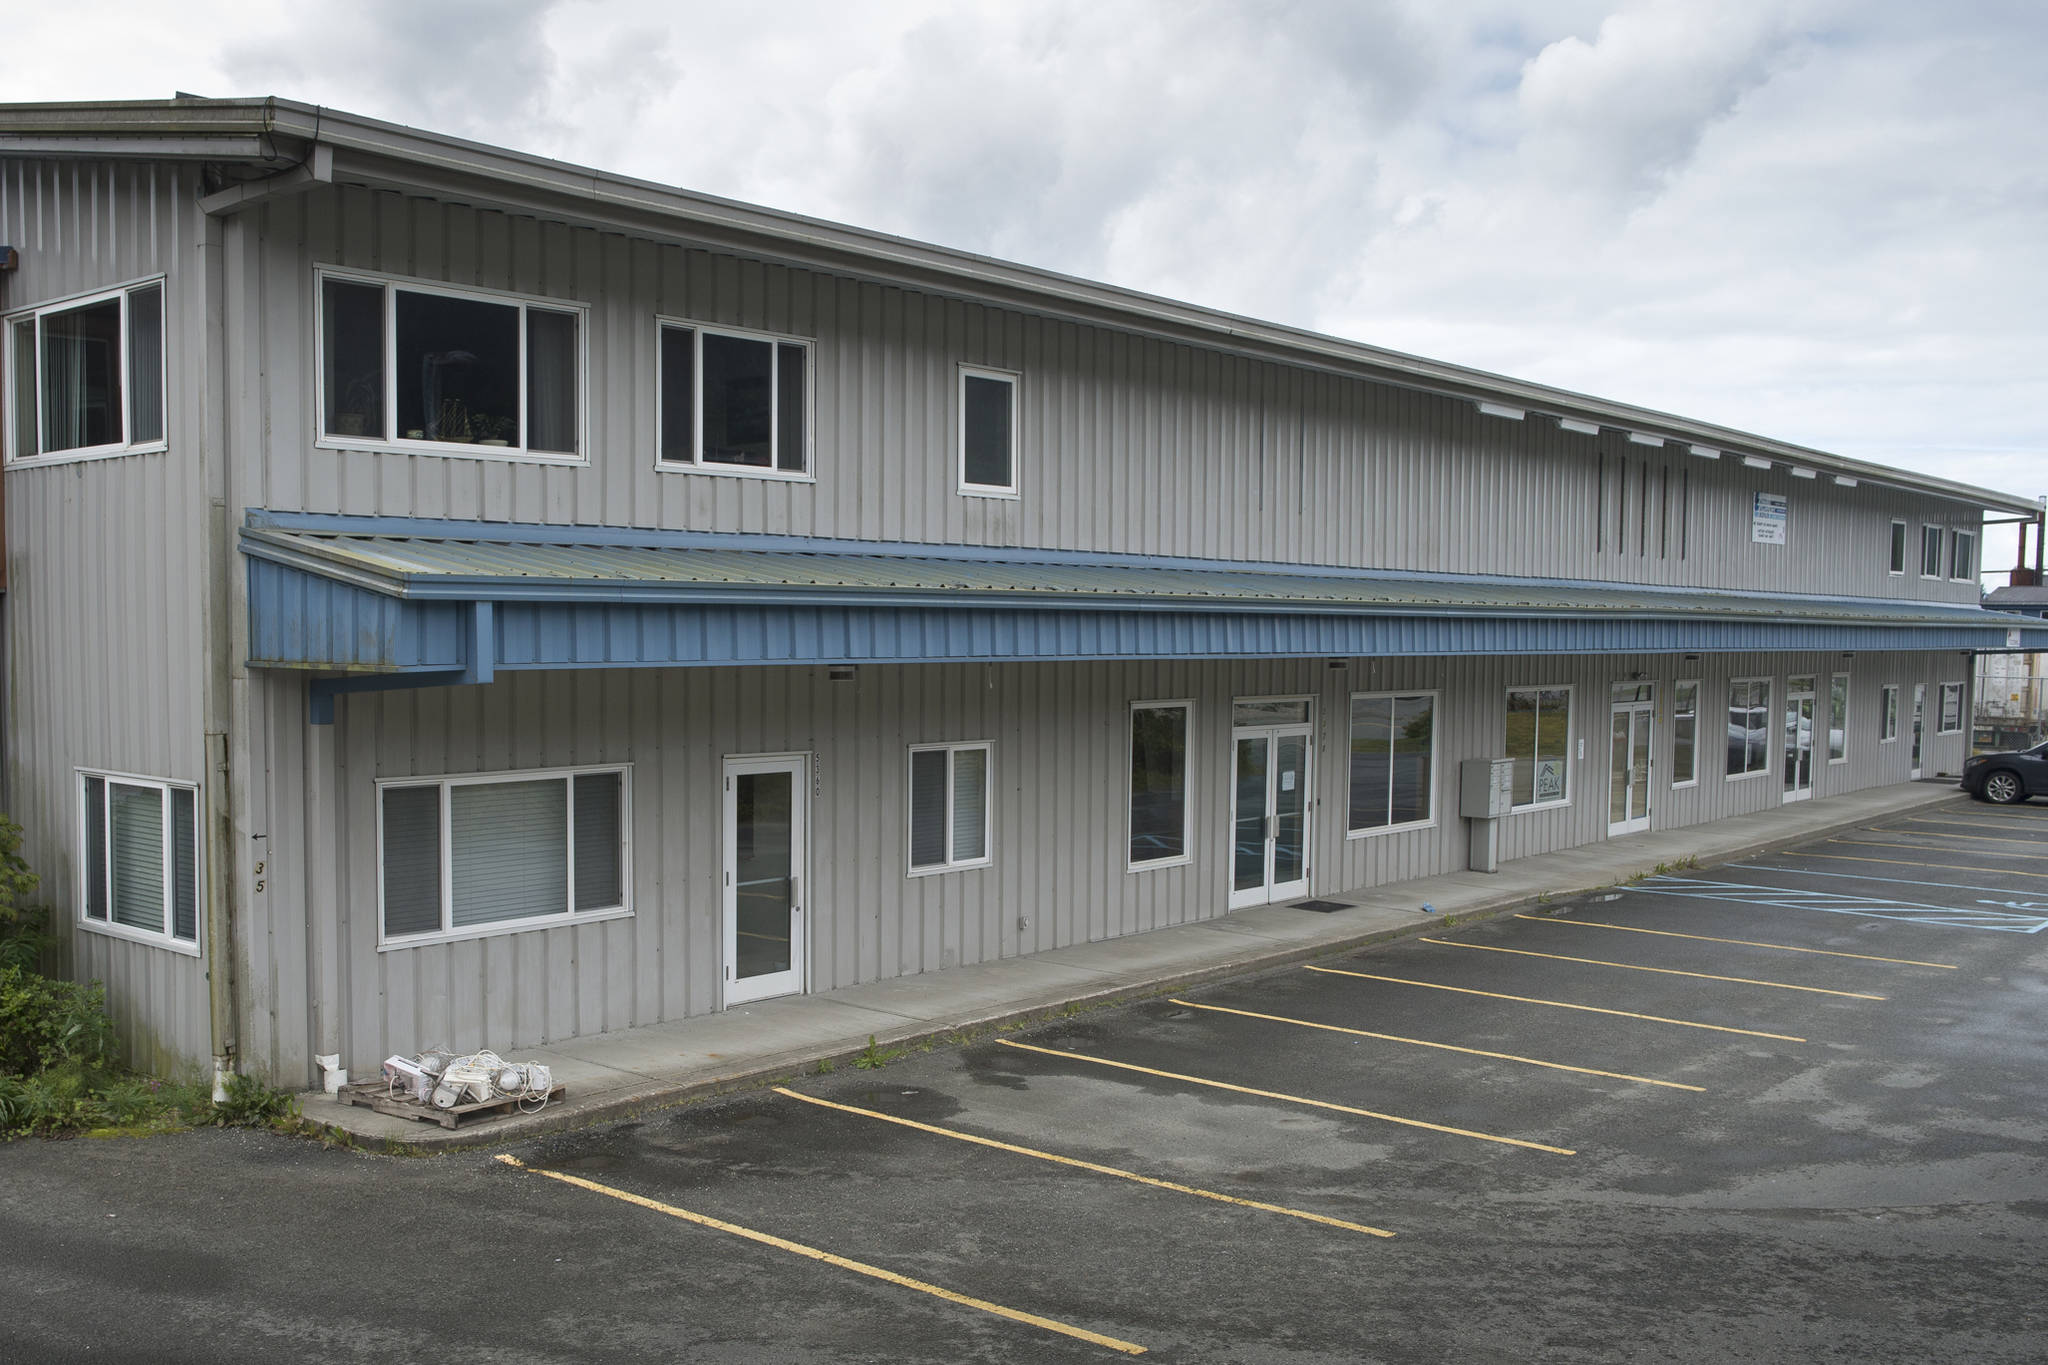 The Alaskan Brewing Company has bought three of the five business units in a building owned by Anchor Electric Company to possibly relocate their tasting room or other operations.. (Michael Penn | Juneau Empire)